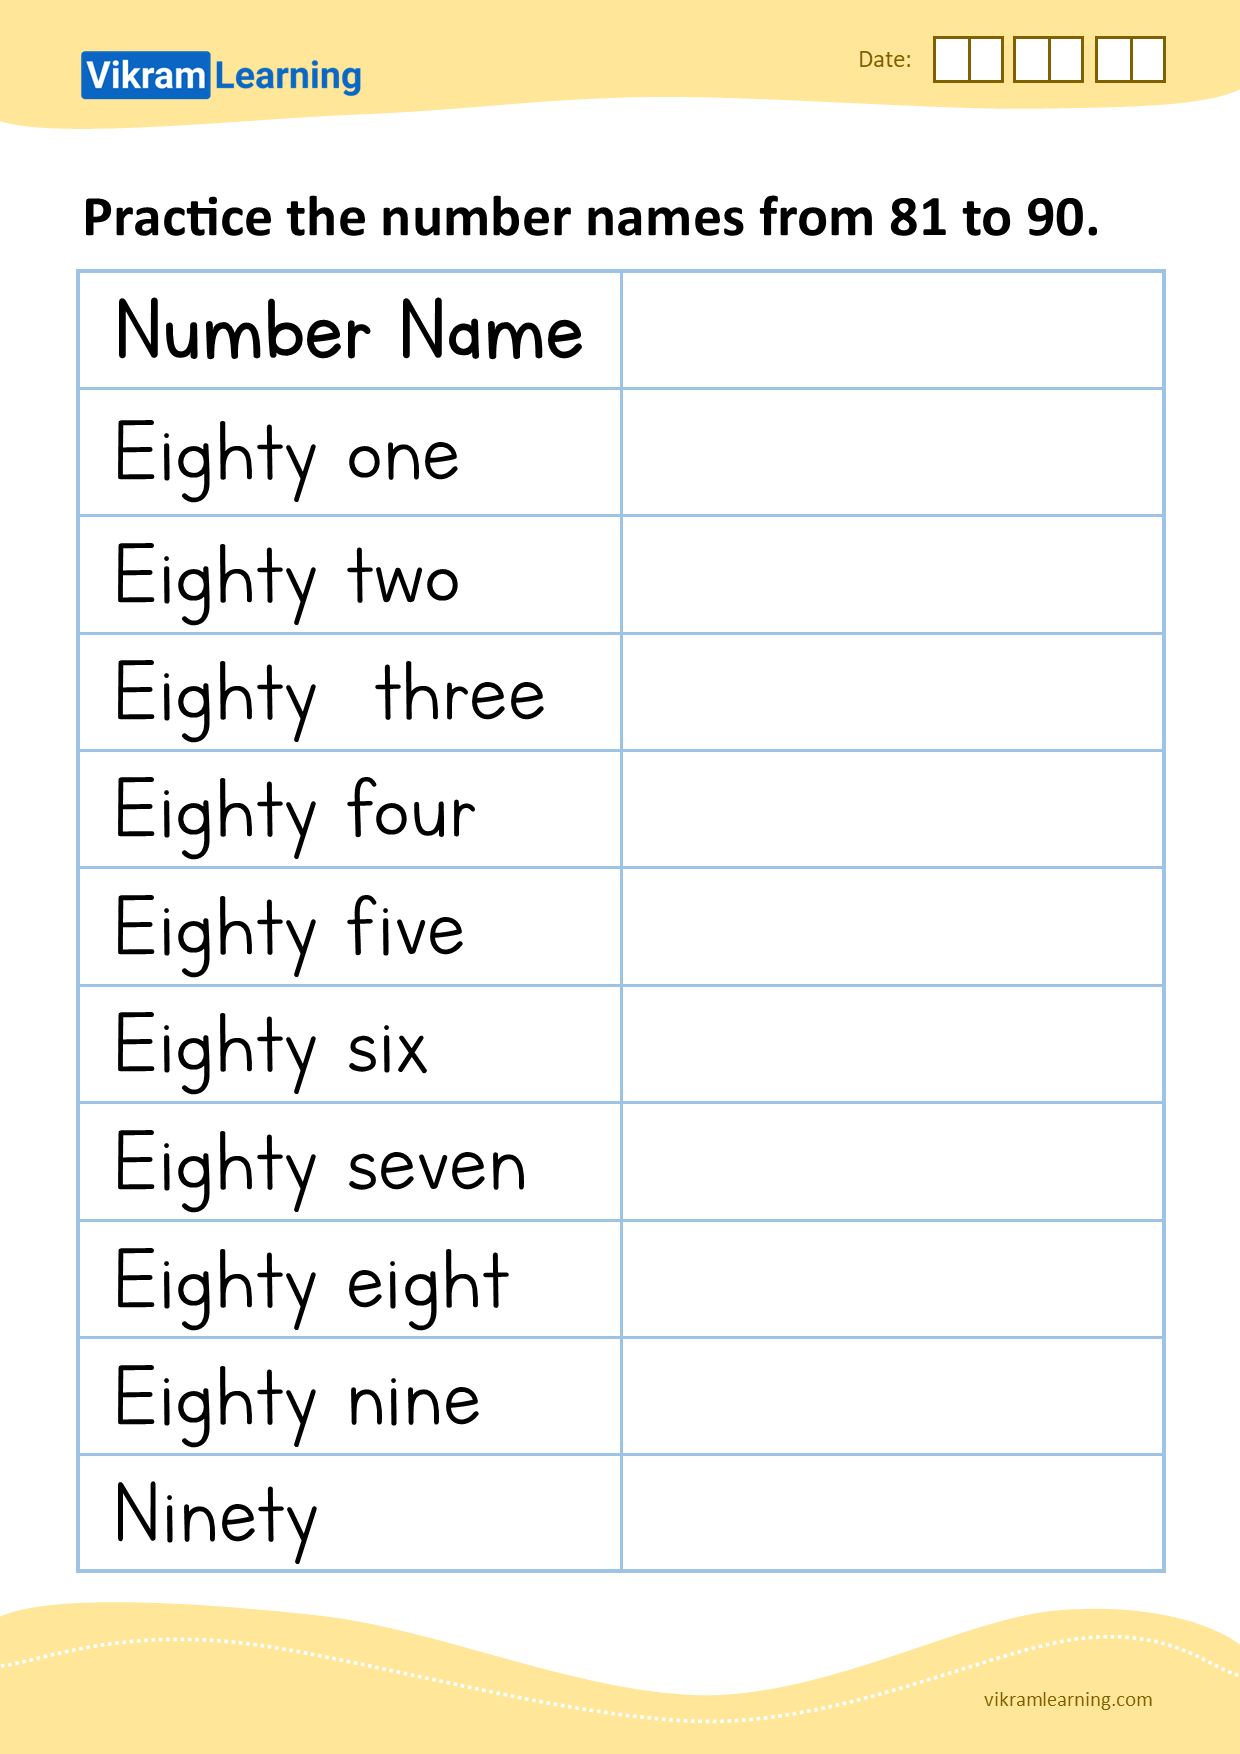 download-practice-the-number-names-from-81-to-90-worksheets-vikramlearning